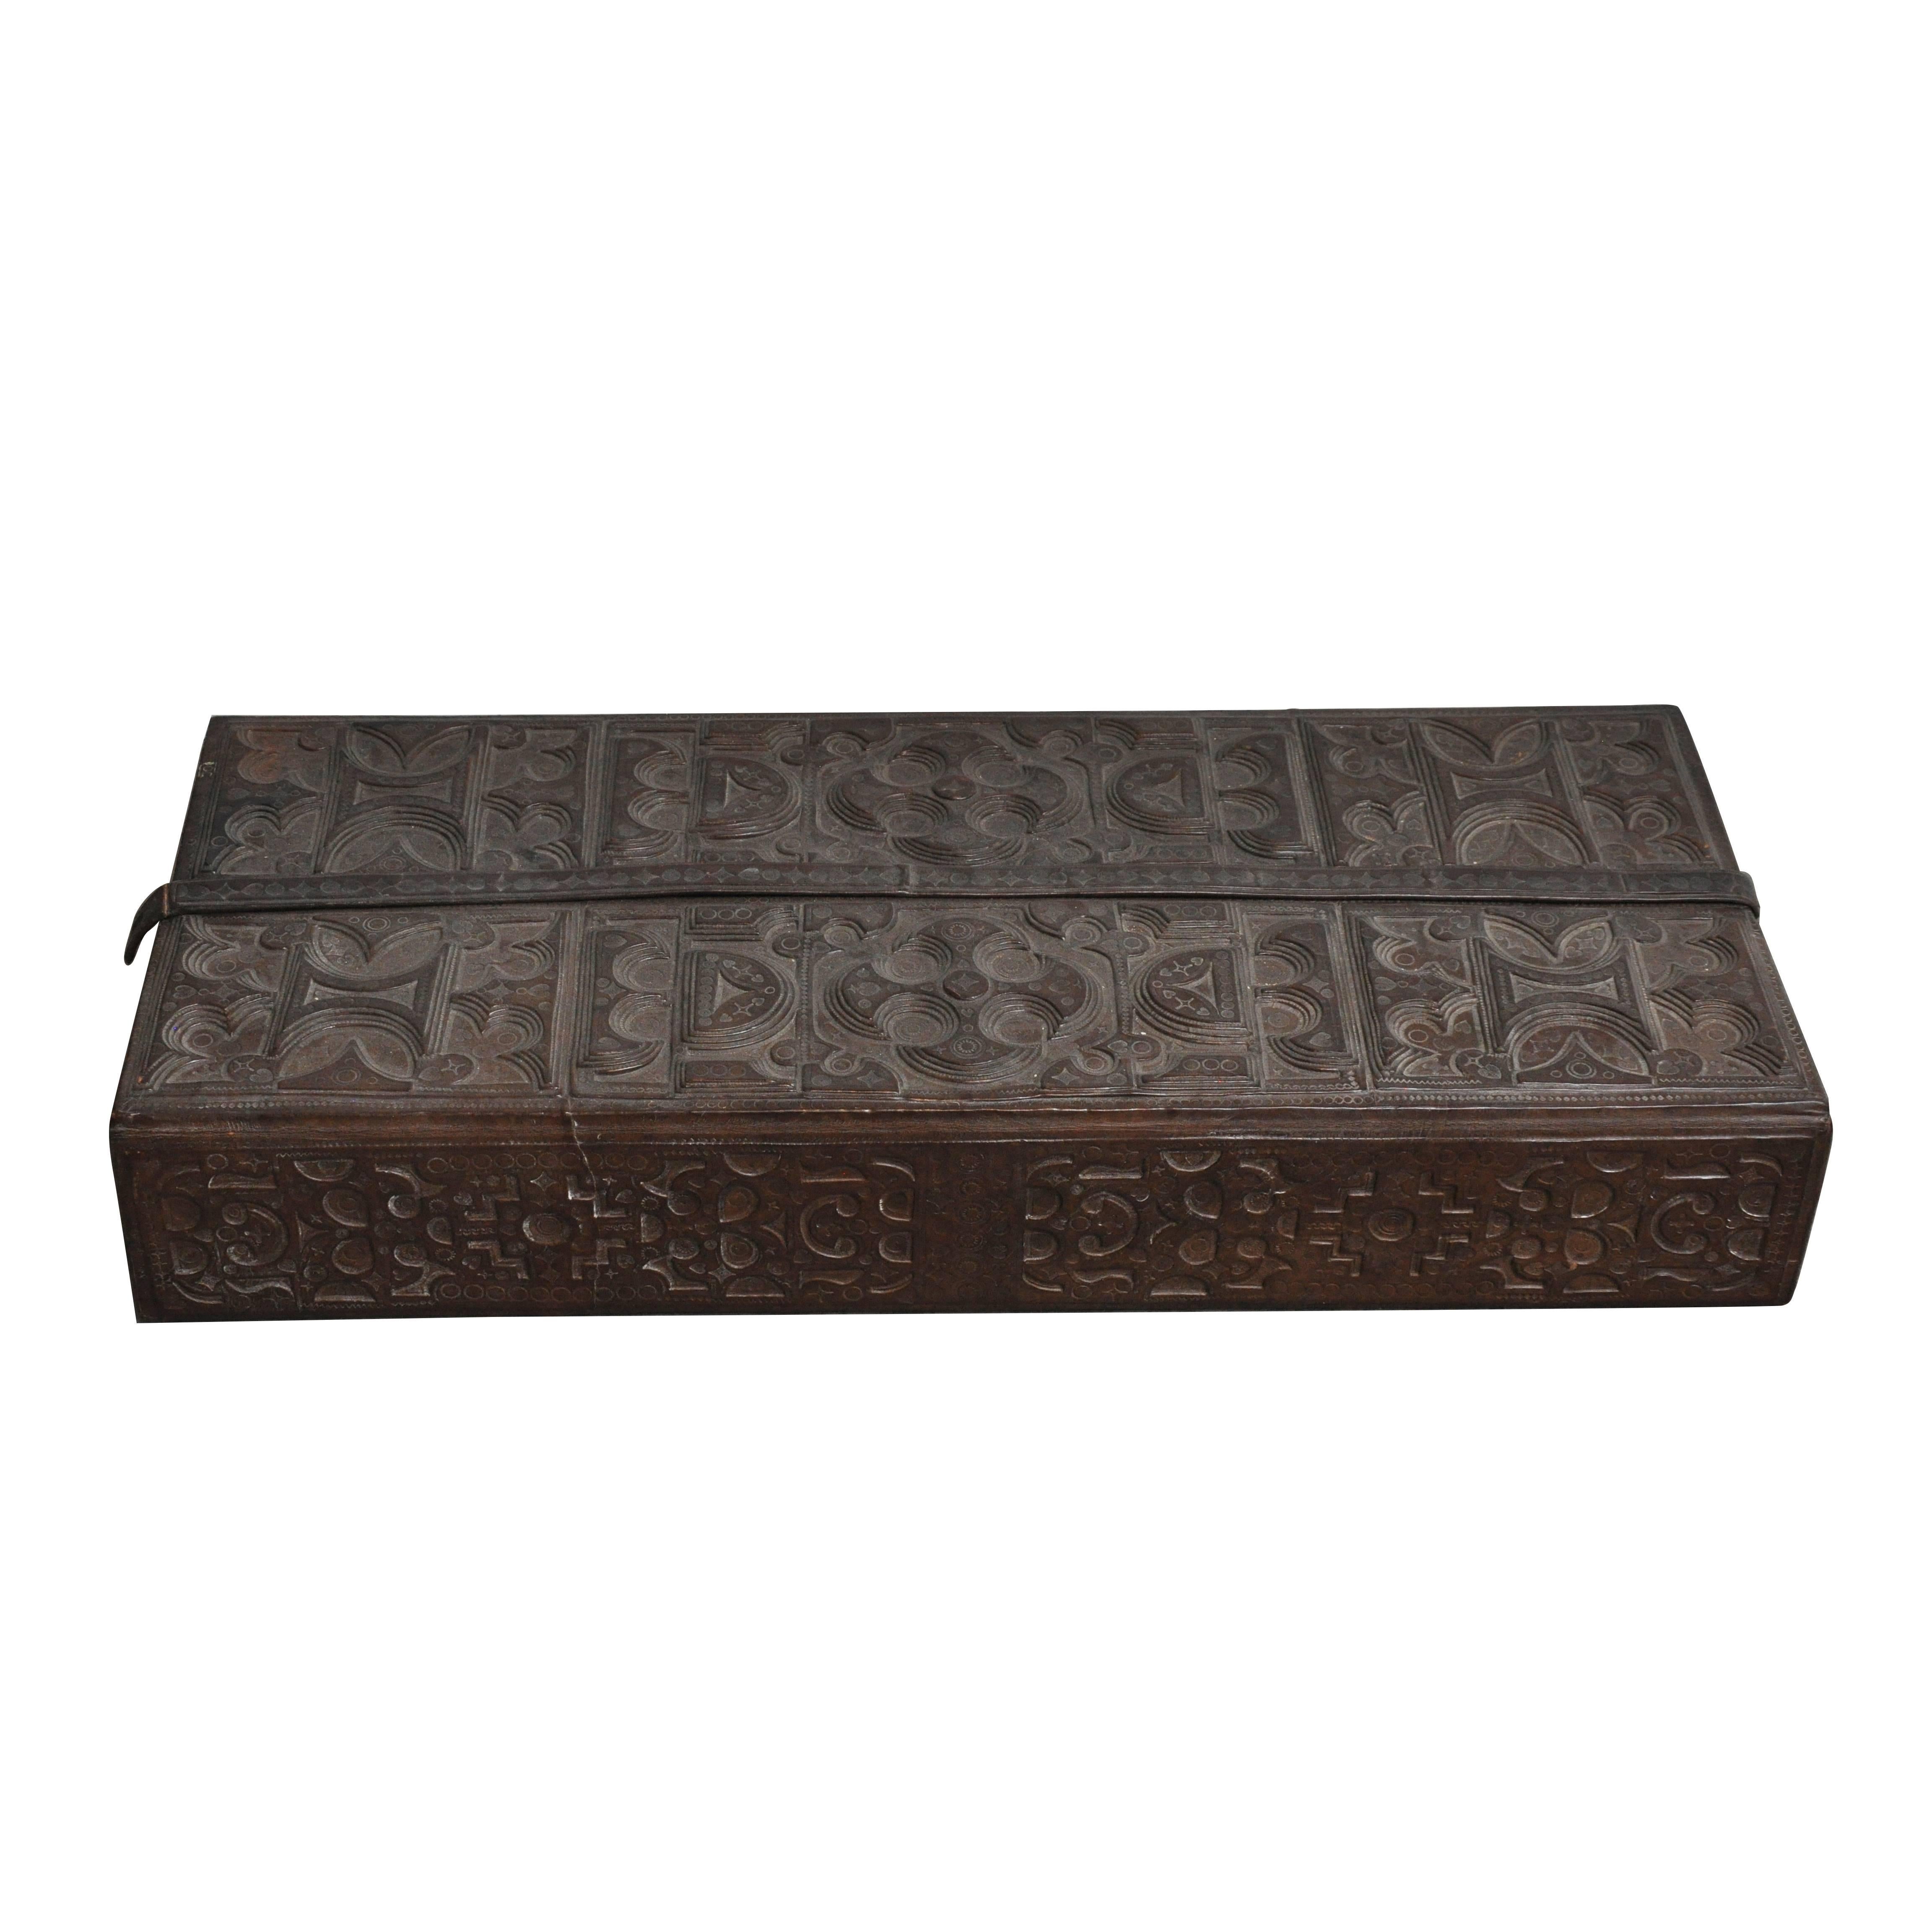 Early 20th Century Tooled Leather Box from Morocco